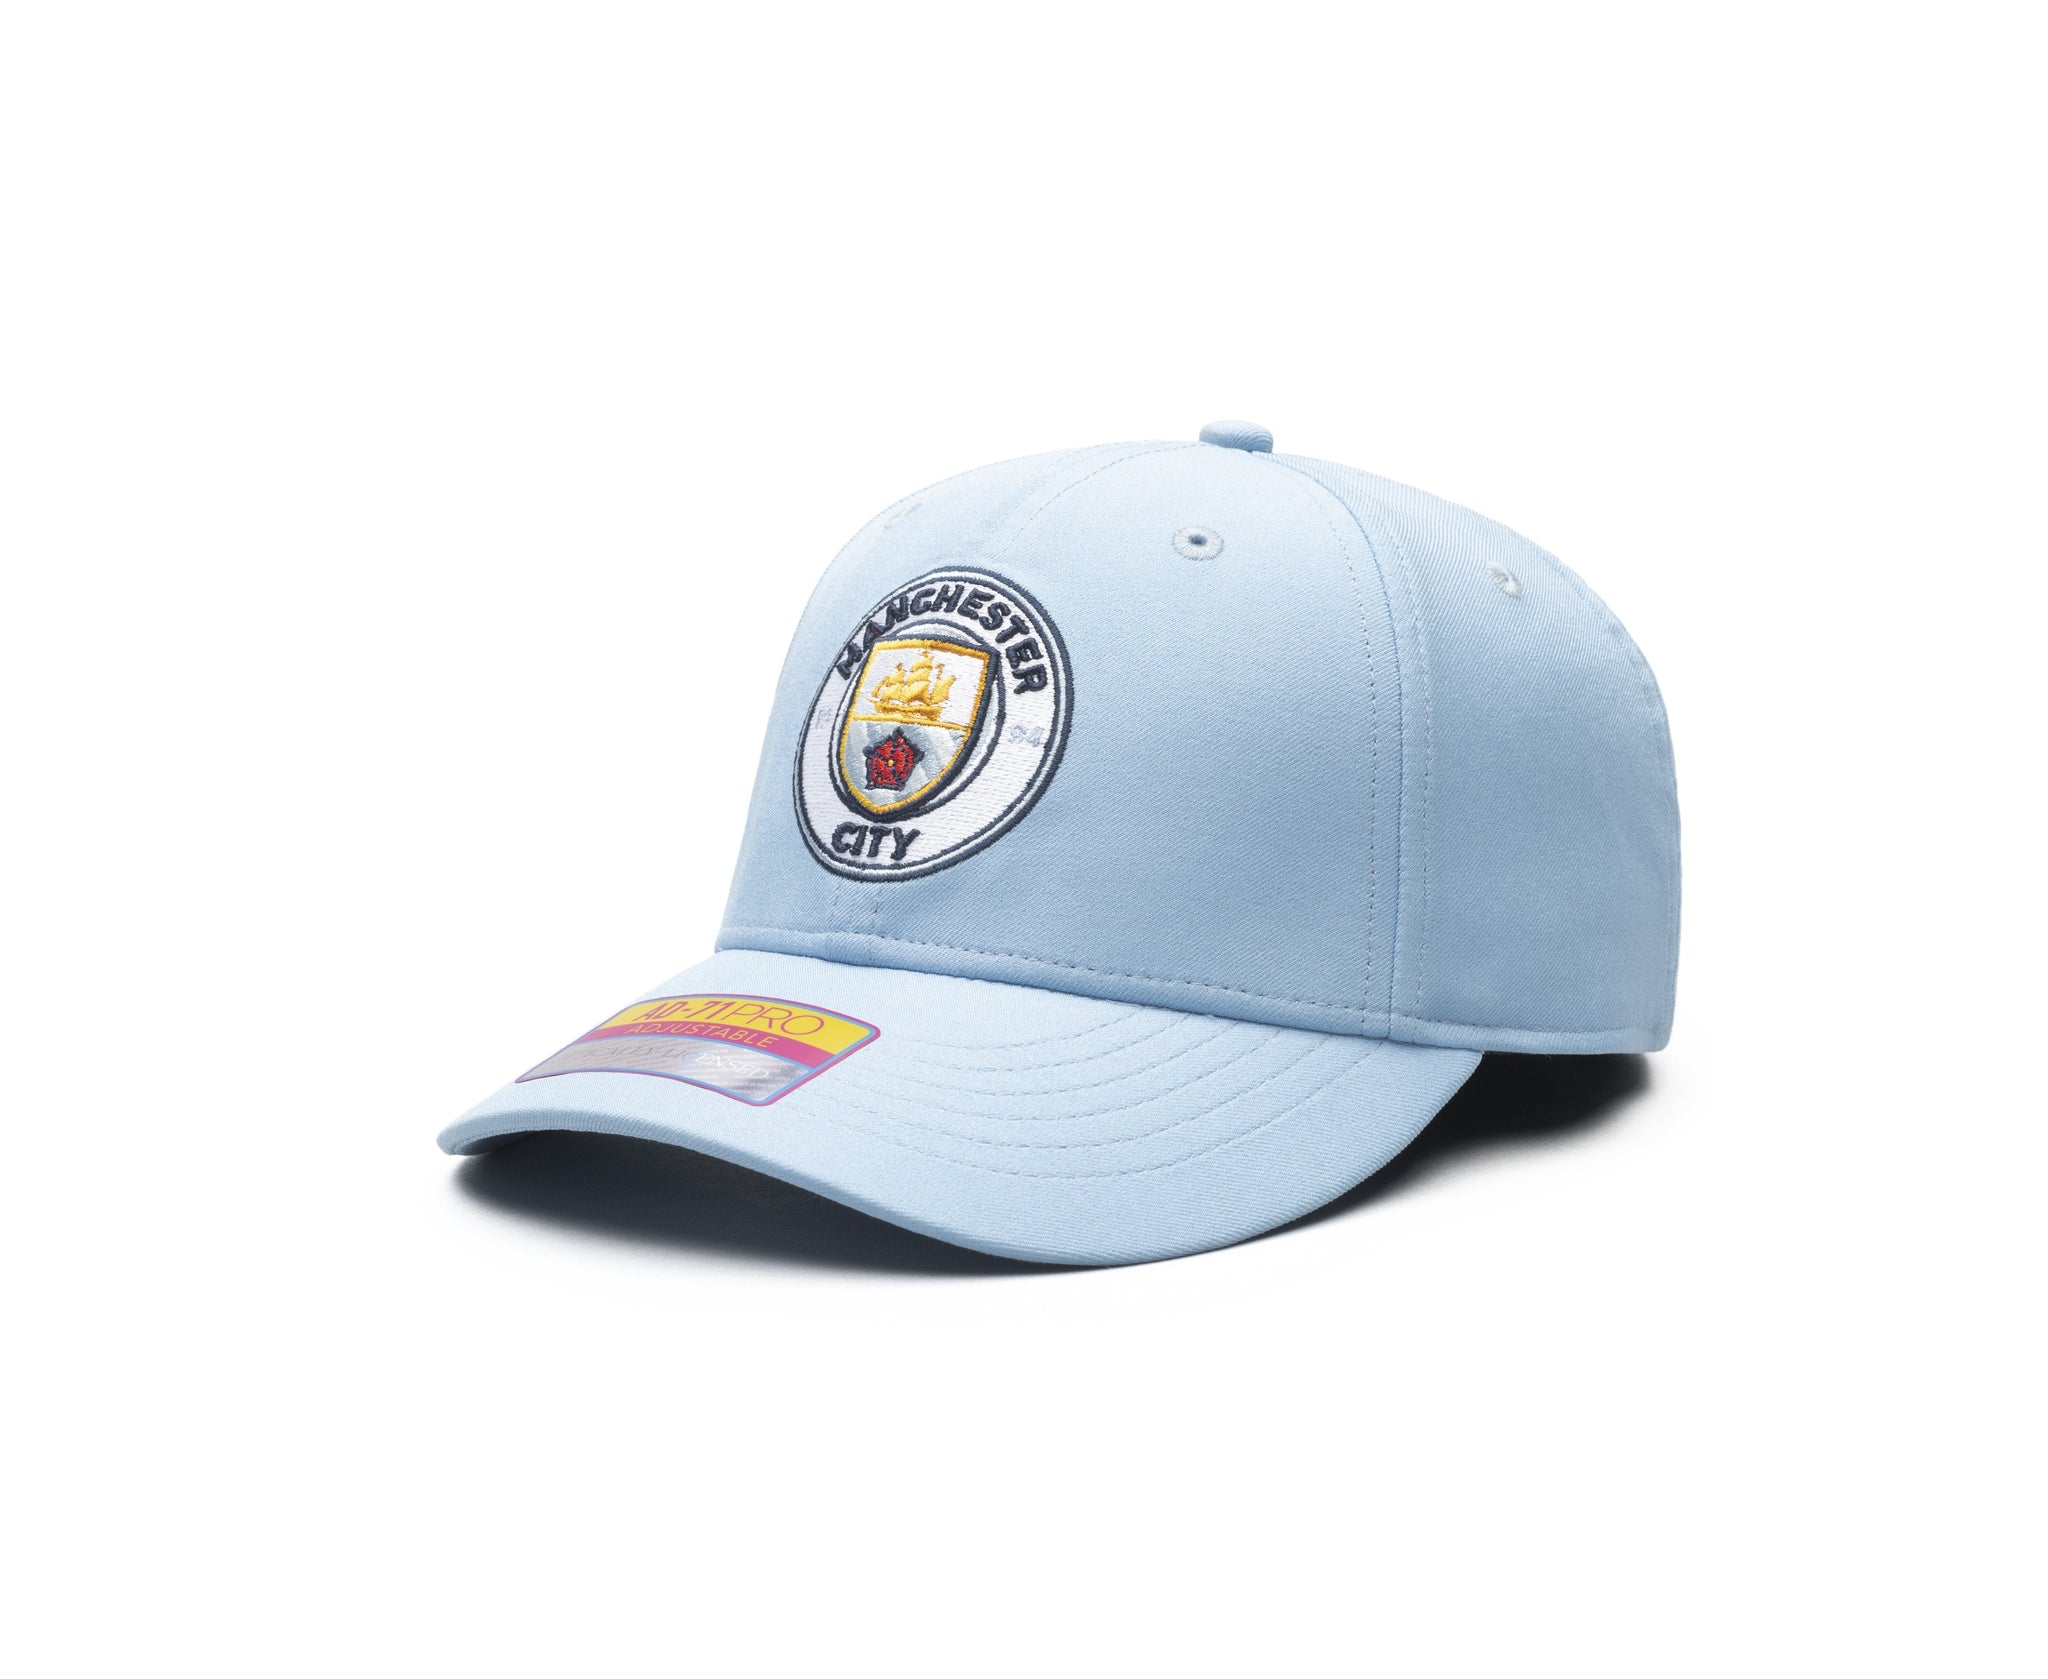 Manchester City Standard Adjustable hat with mid crown, curved peak brim, and adjustable closure.